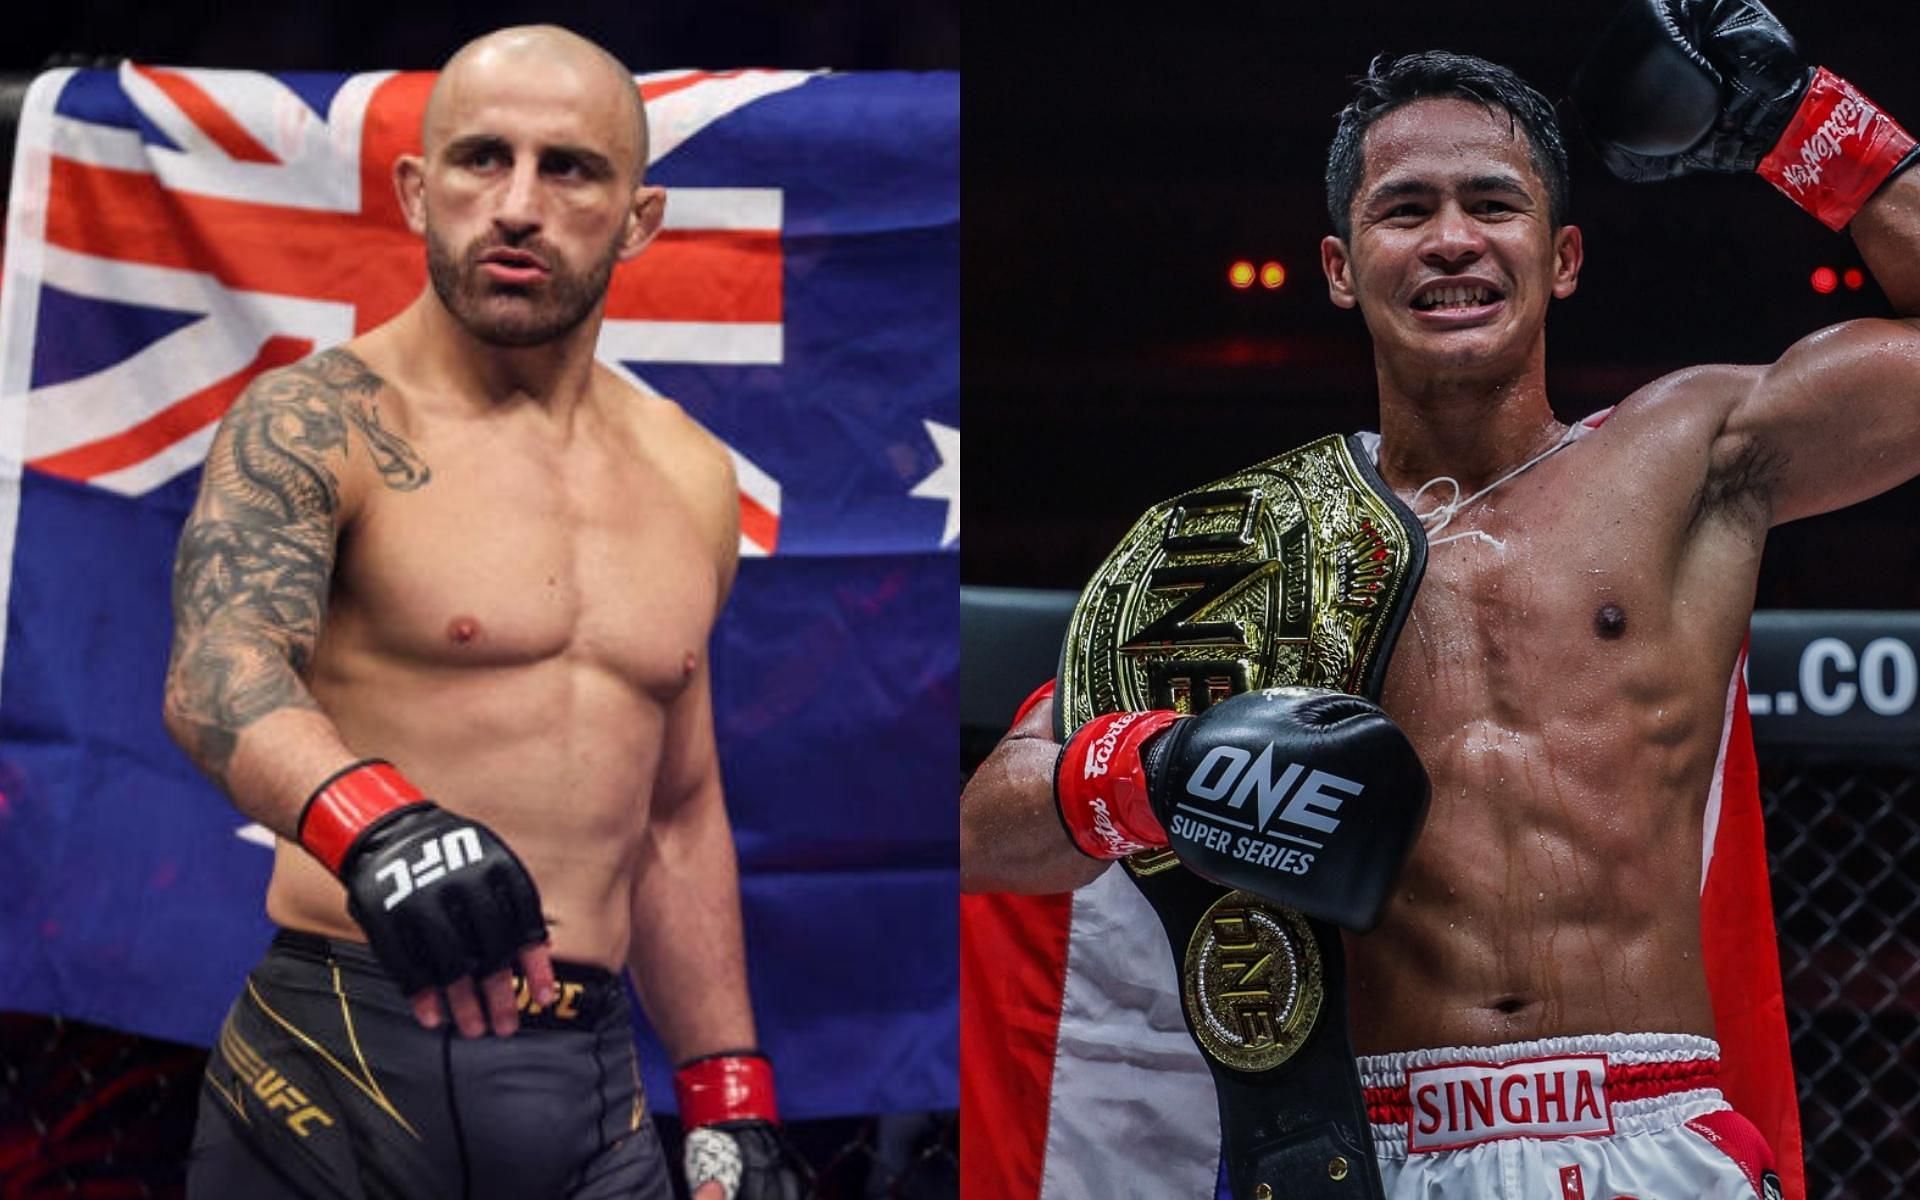 UFC featherweight champion Alexander Volkanovski (left) plans on working with ONE featherweight kickboxing champion Superbon Singha Mawynn (right). (Images courtesy: Getty Images, ONE Championship)